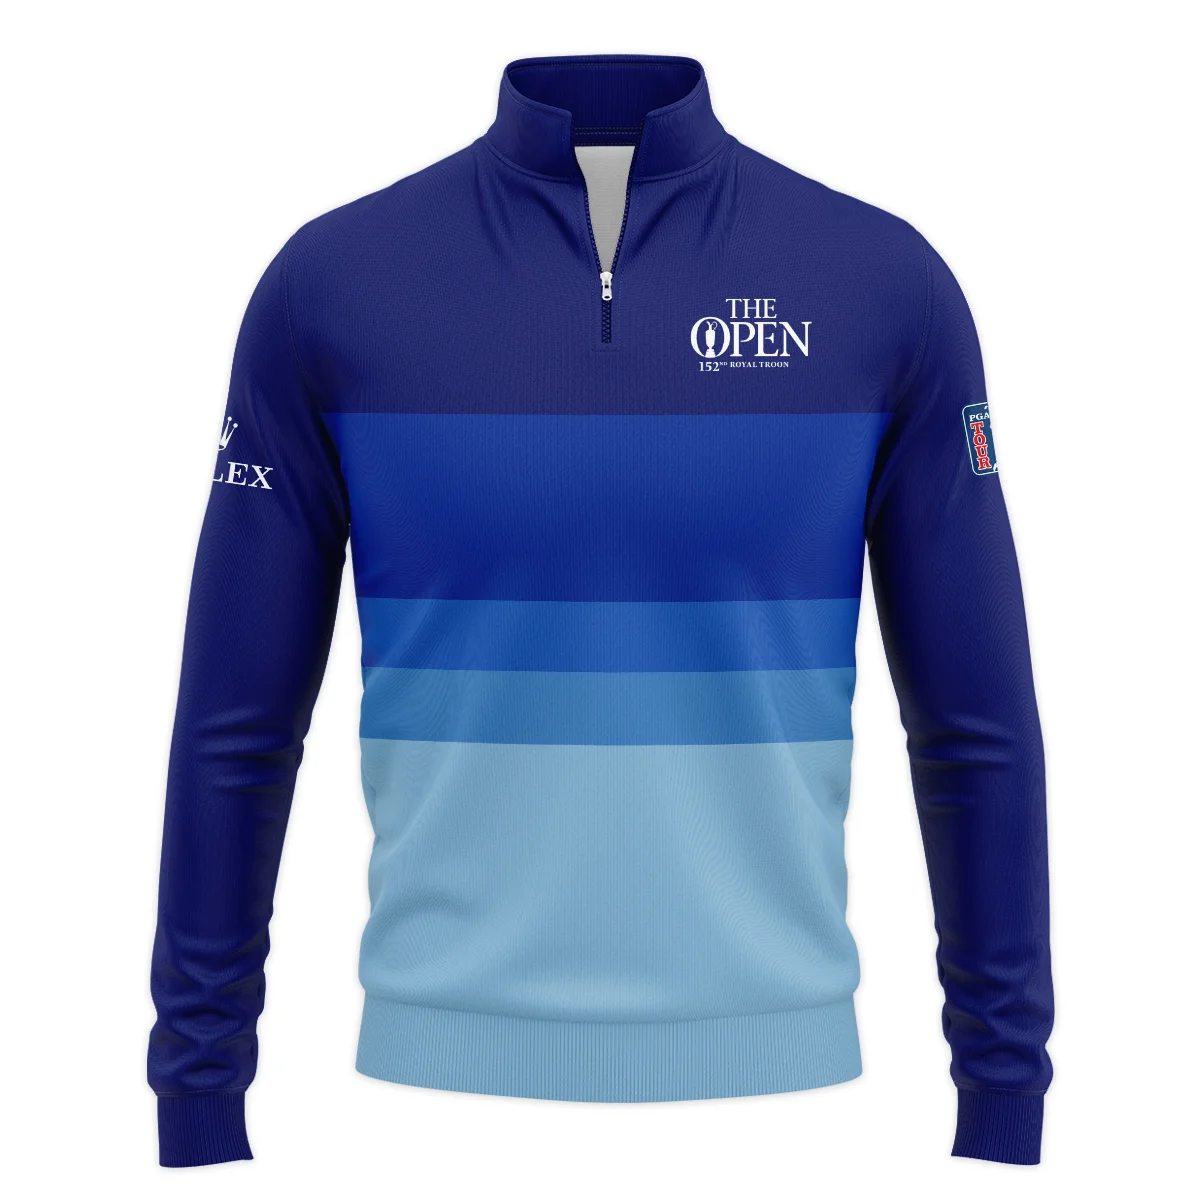 Blue Gradient Line Pattern Background Rolex 152nd Open Championship Performance Quarter Zip Sweatshirt With Pockets All Over Prints HOTOP270624A04ROXTS